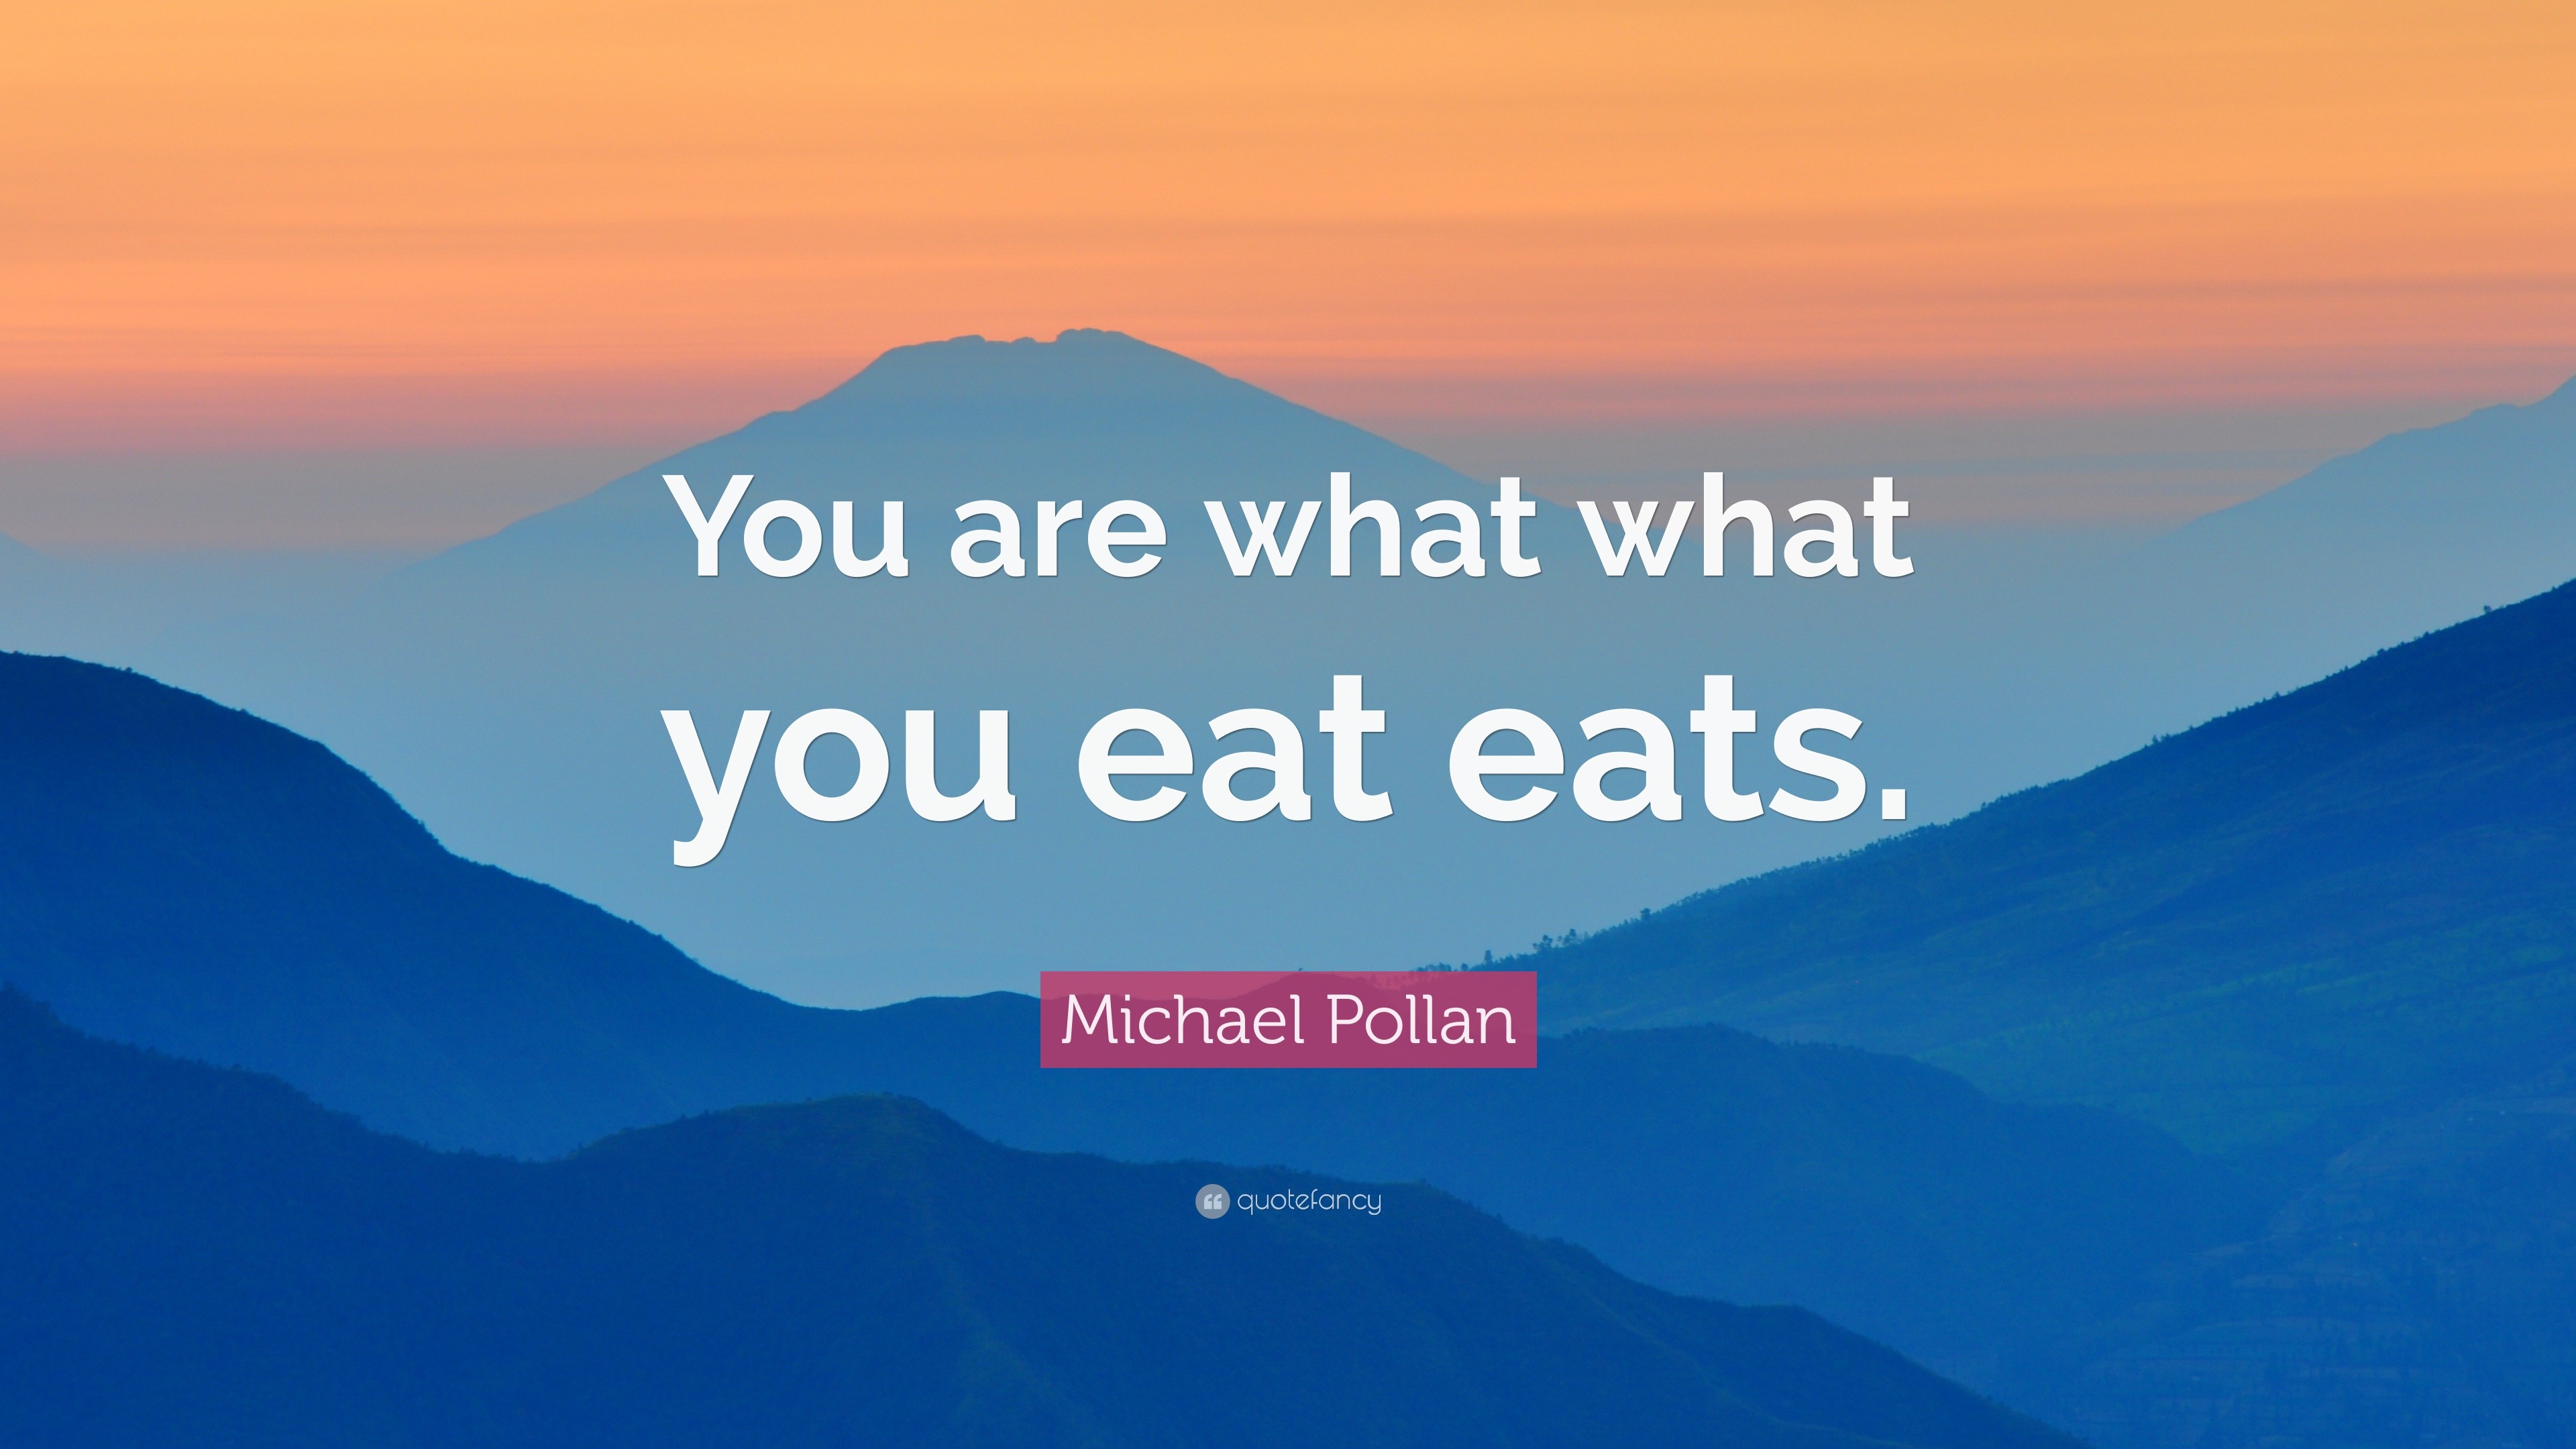 Michael Pollan Quote “you Are What What You Eat Eats”